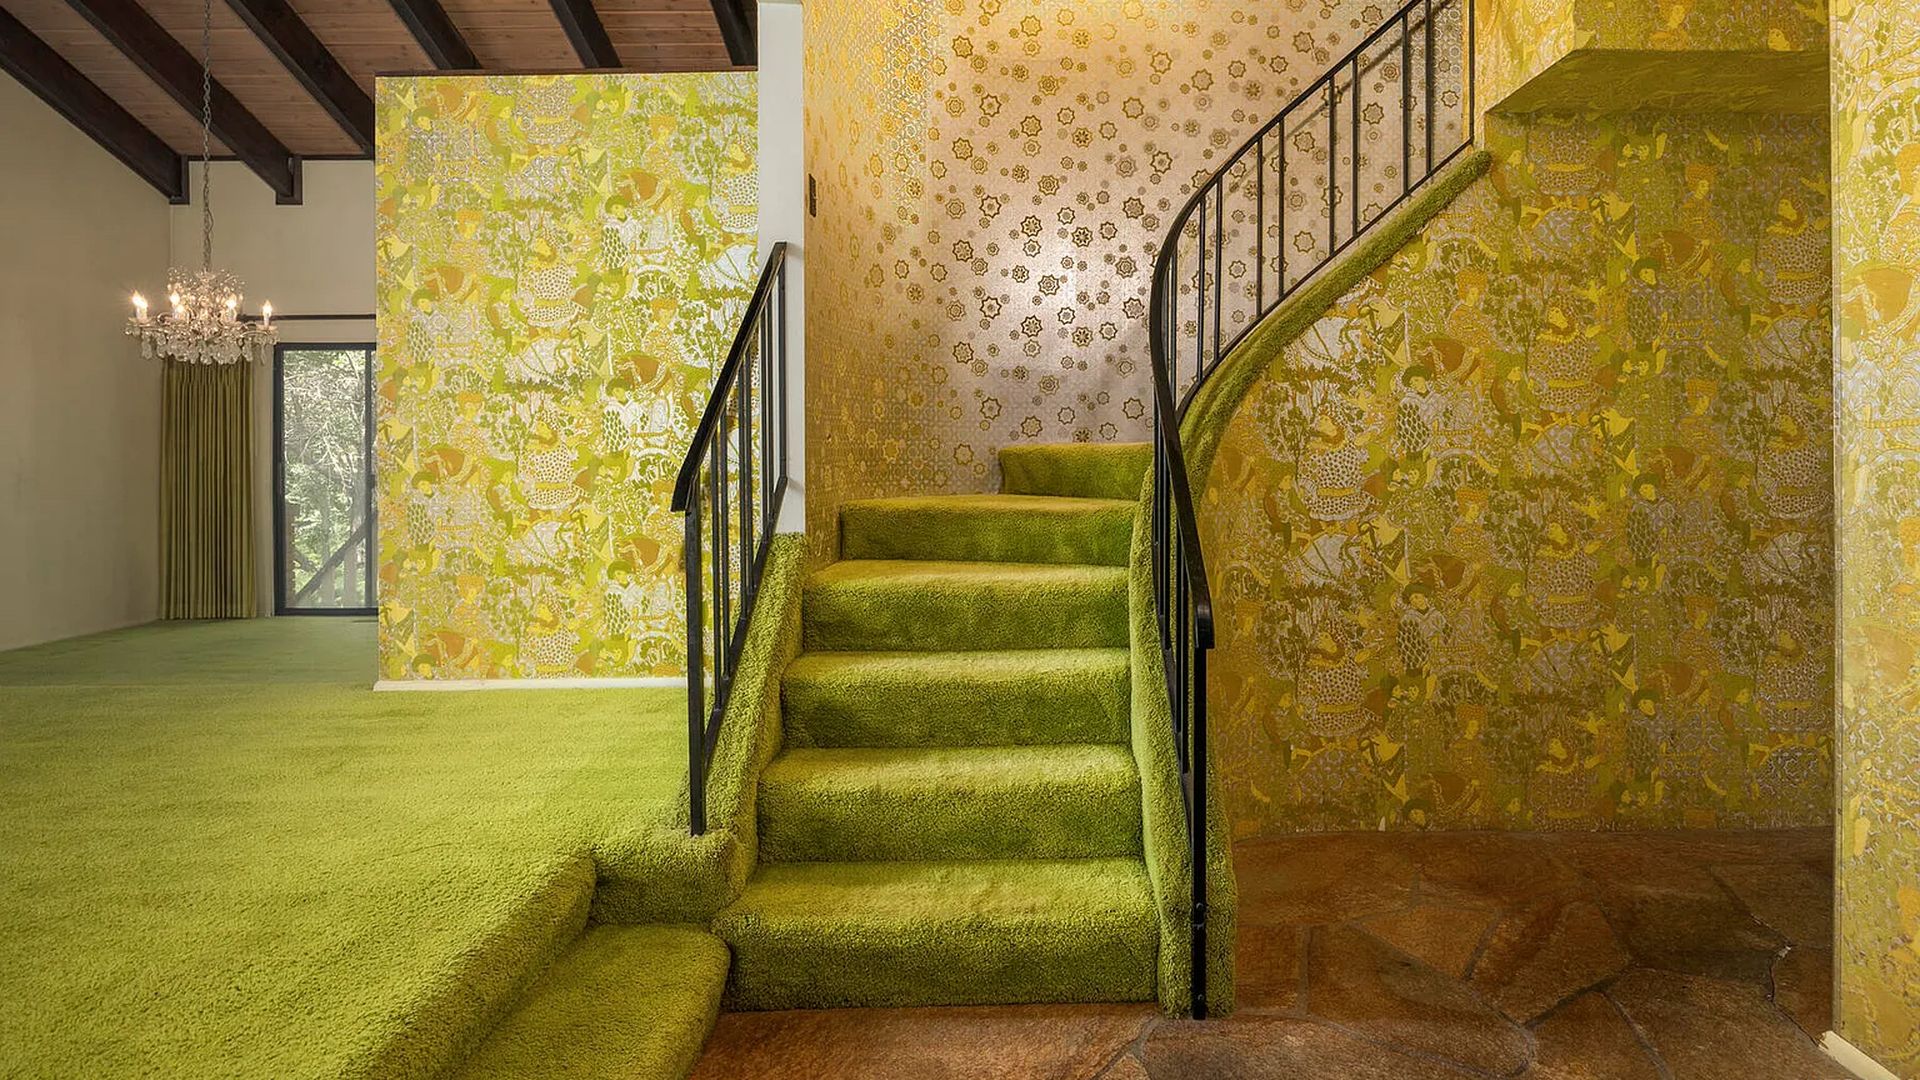 A curving staircase with green shag carpet and wrought iron rails swirls over metallic wallpaper depicting medieval scenes.